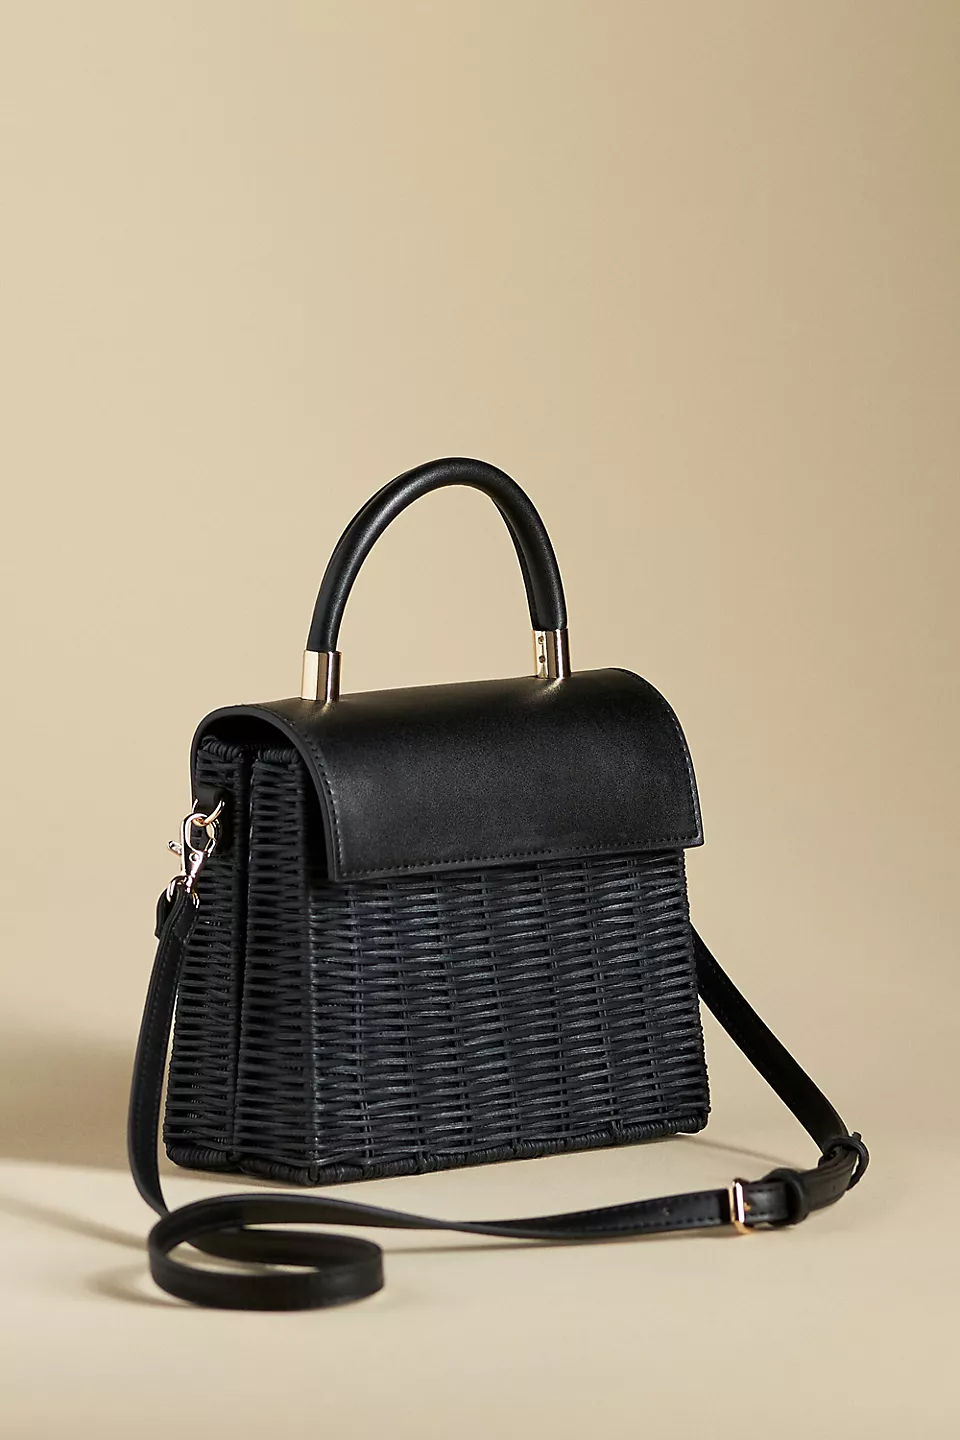 By Anthropologie + Wicker Top Handle Lady Bag